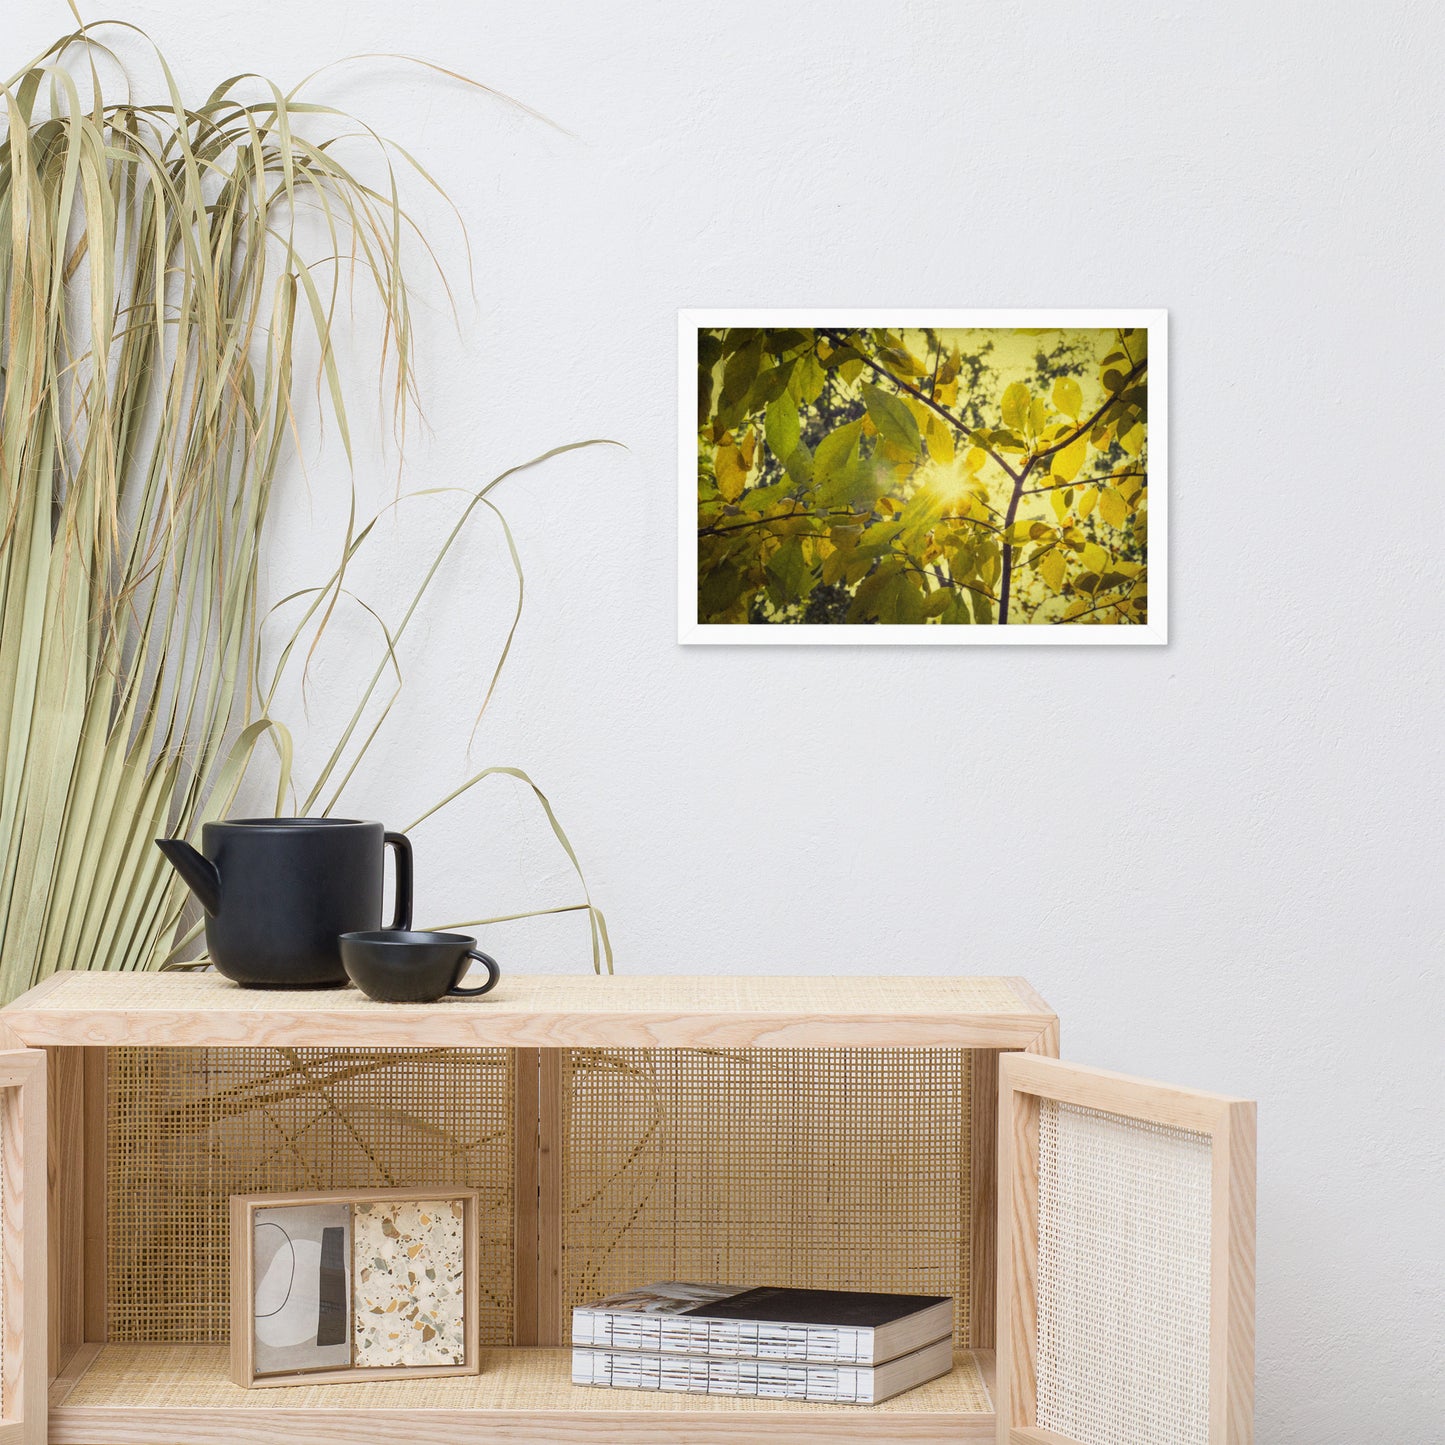 Hallway Framed Art: Aged Golden Leaves Abstract / Country Farmhouse Style / Botanical / Nature Photo Framed Wall Art Print - Artwork - Home Decor